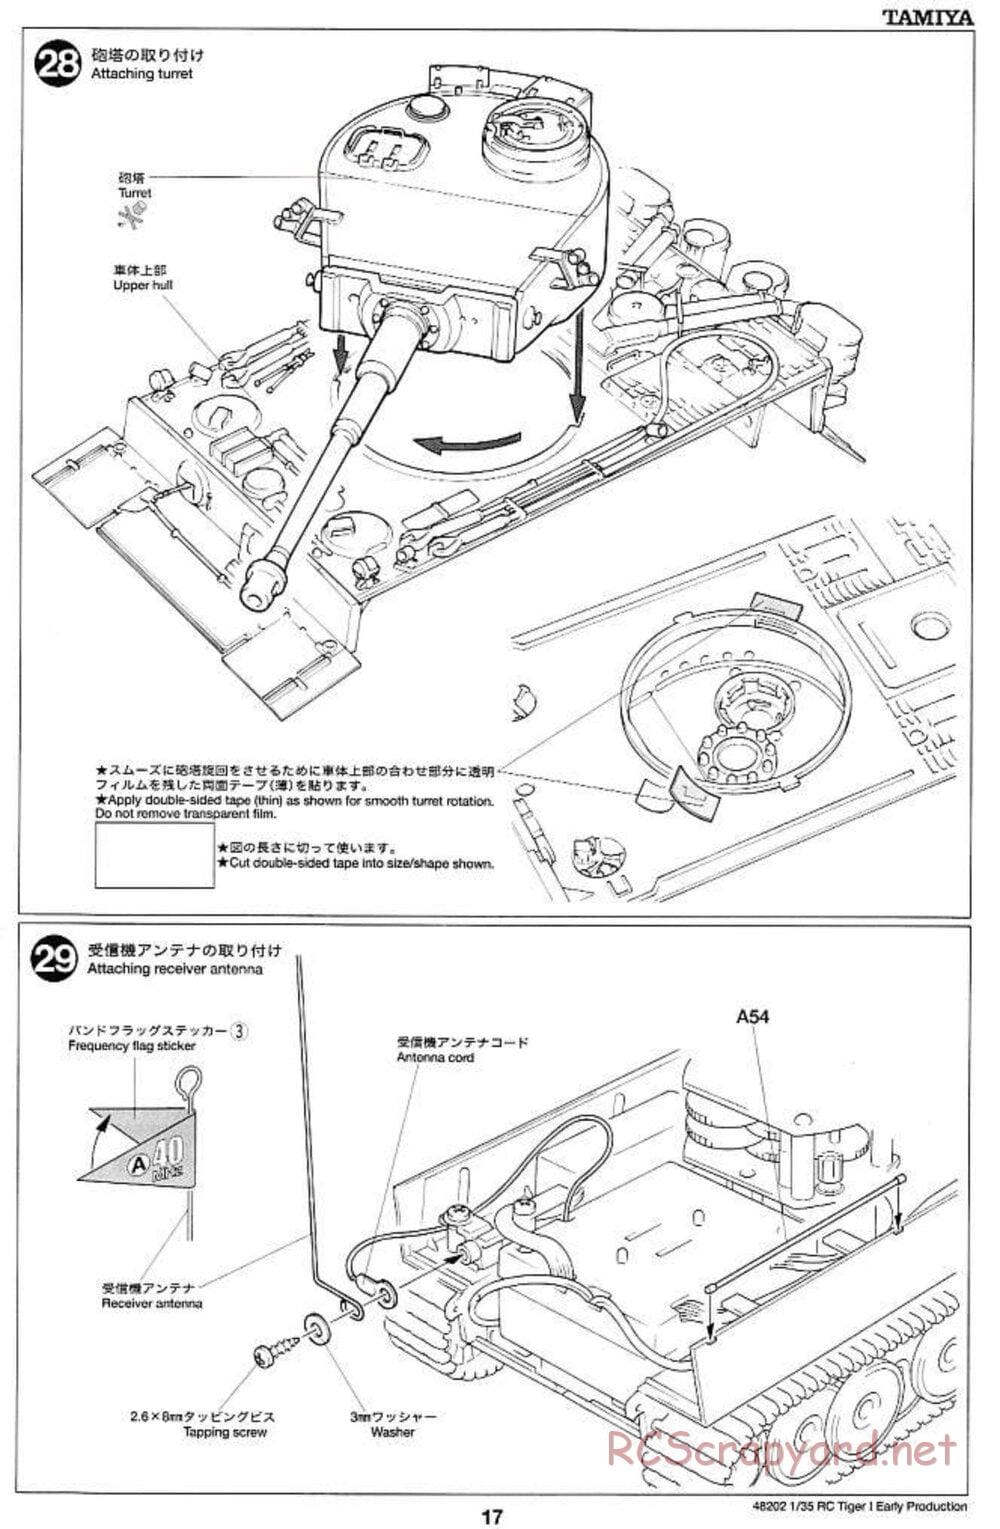 Tamiya - German Tiger 1 Early Production - 1/35 Scale Chassis - Manual - Page 17